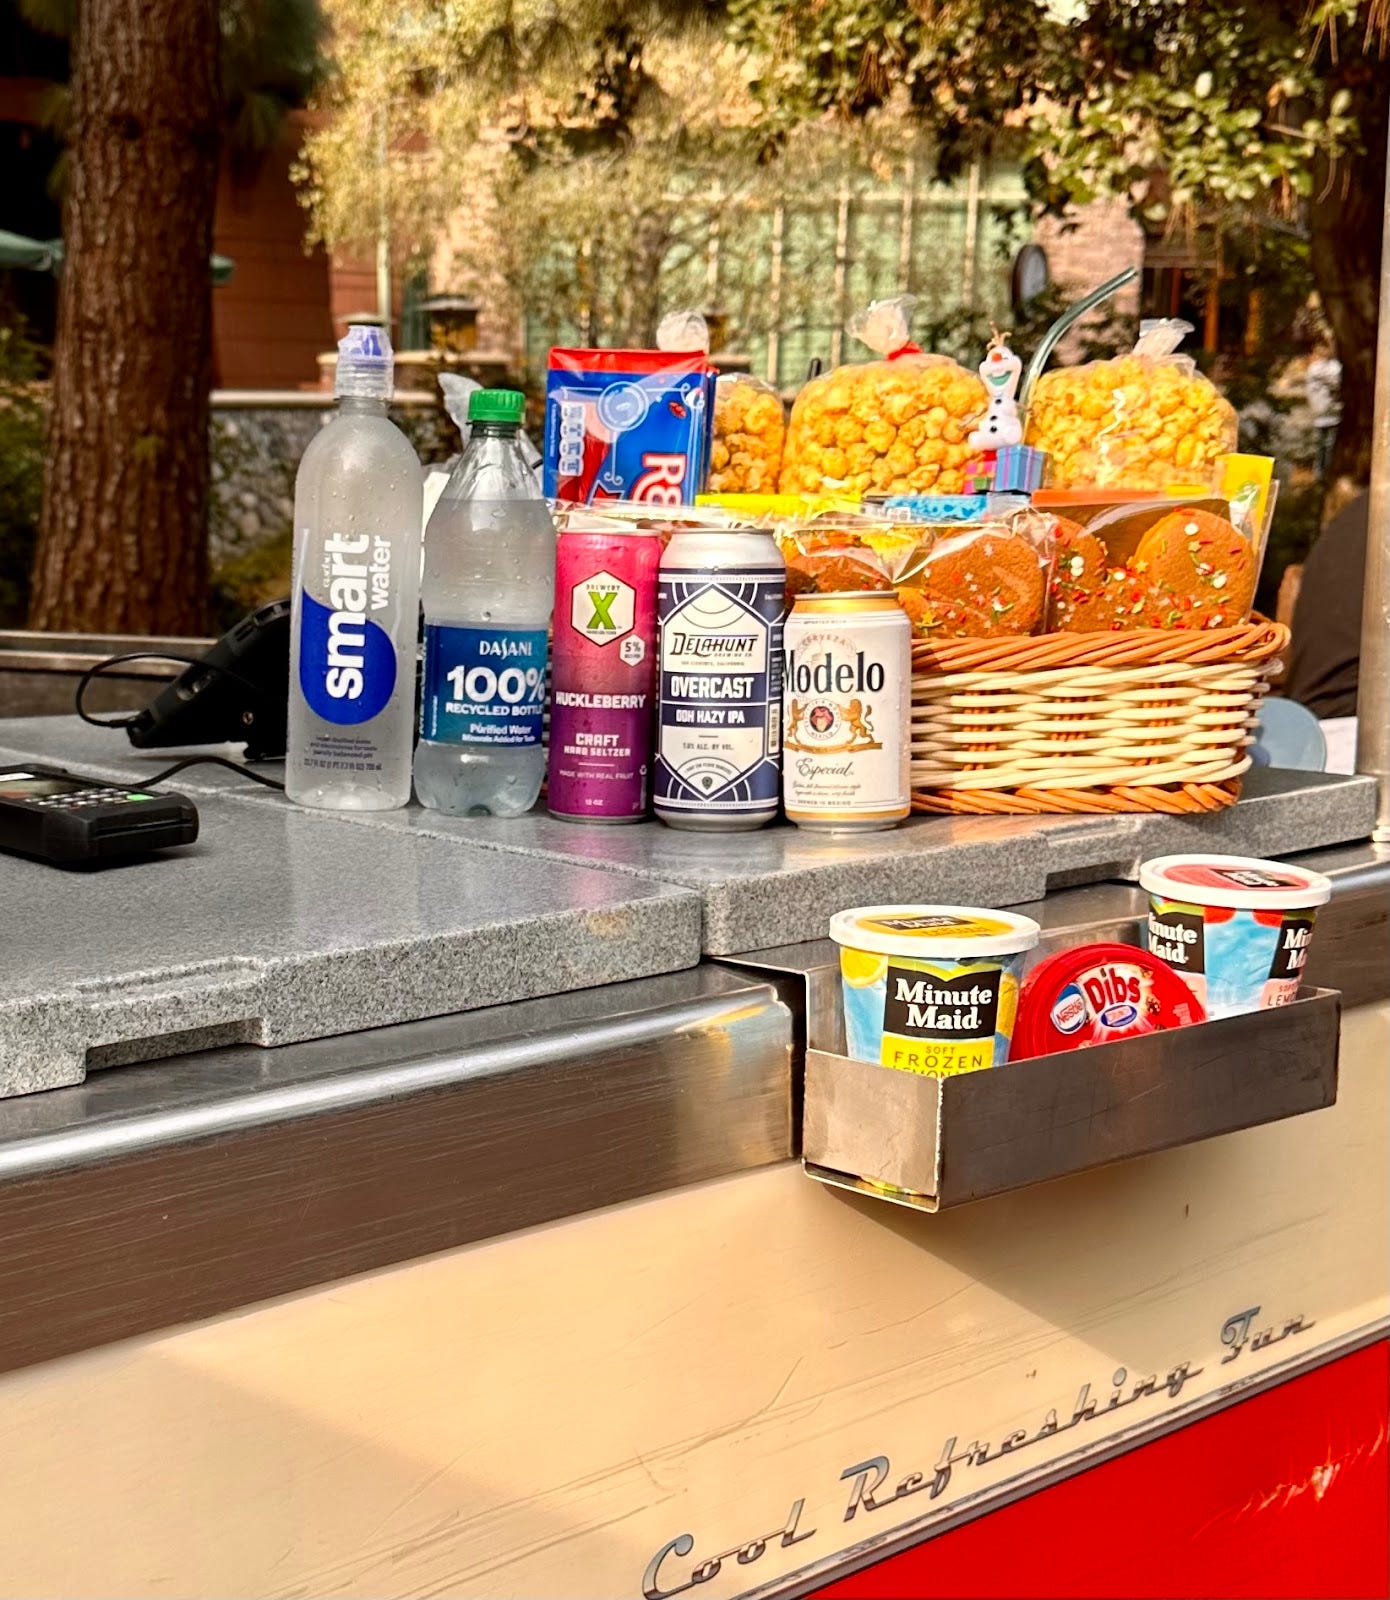 A drink and snack cart from California Adventure that features a couple beer cans